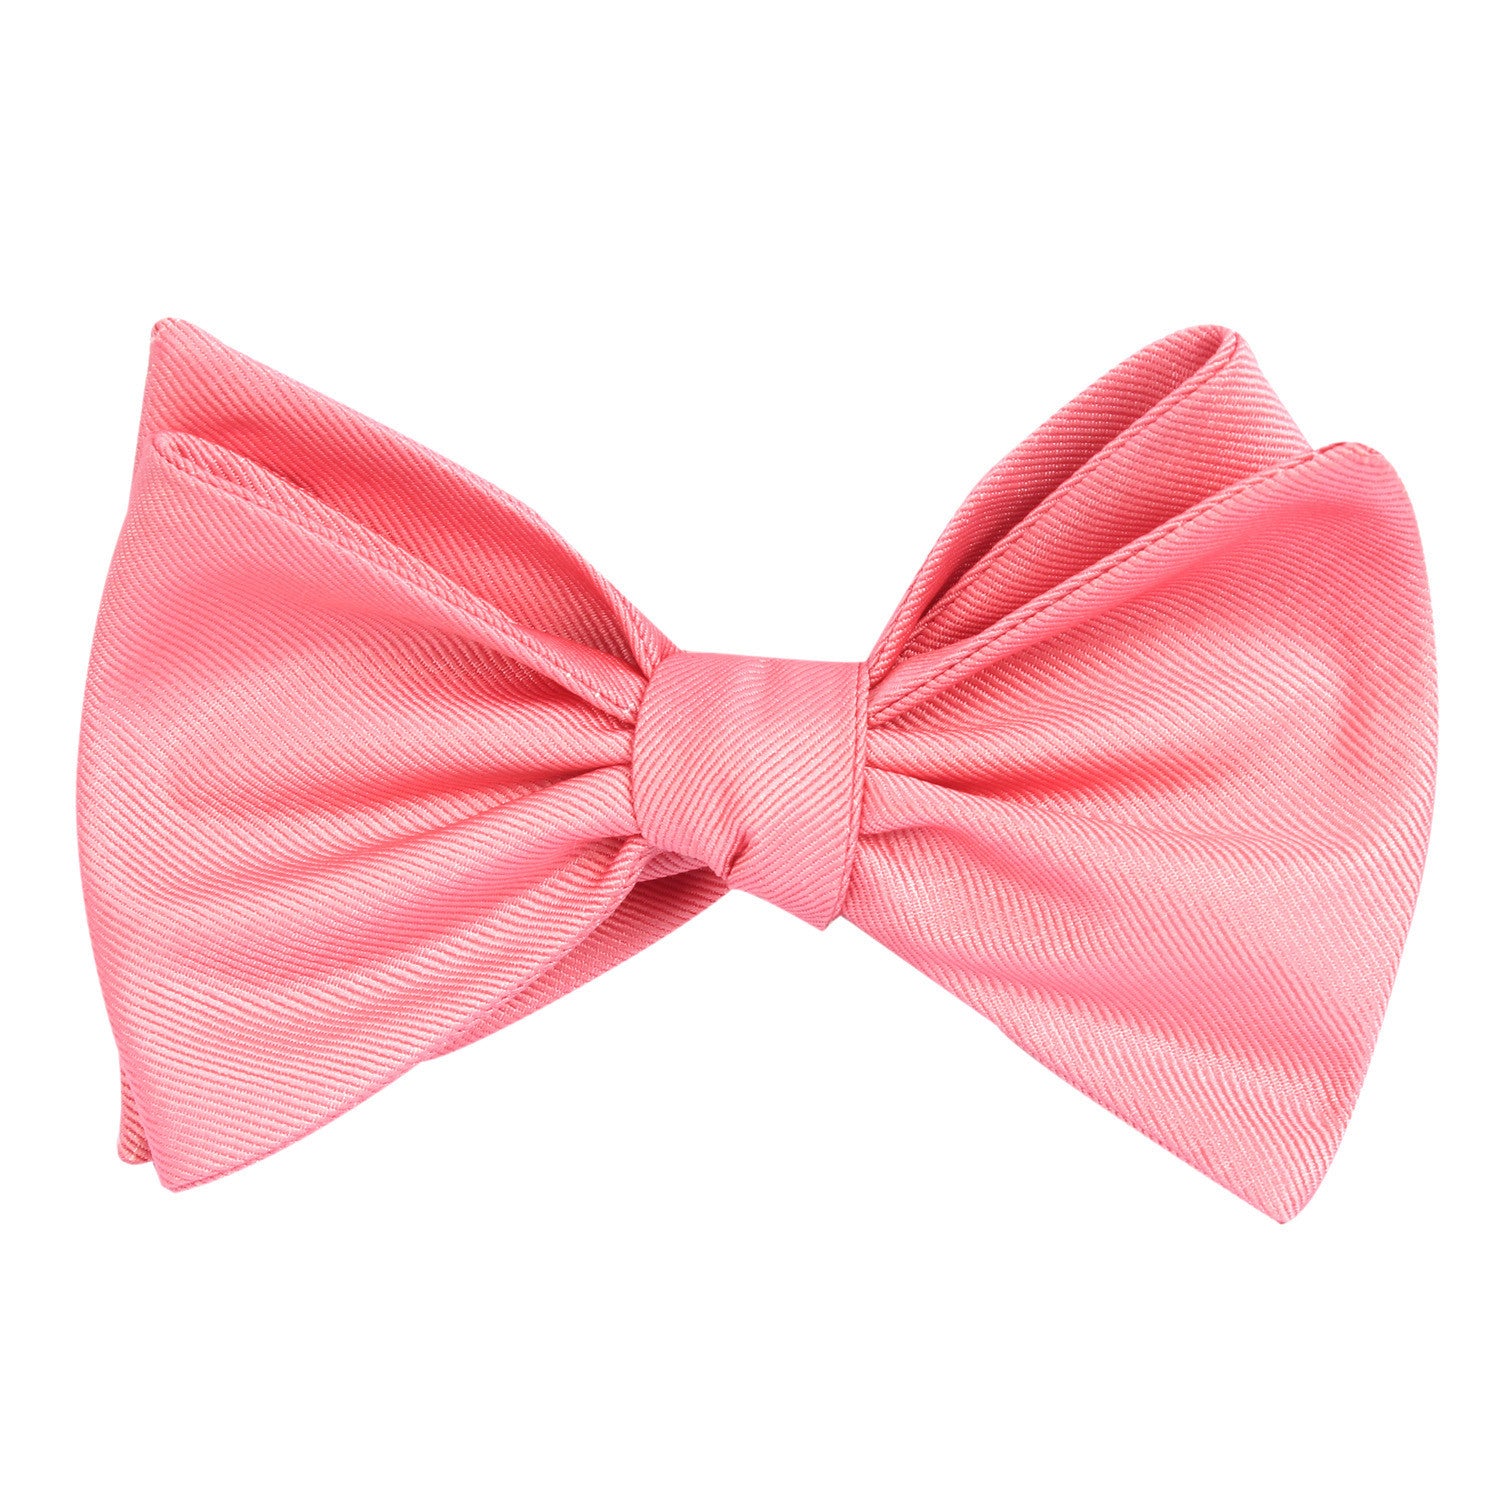 Pastel Pink Self Tie Bow Tie Self tied knot by OTAA